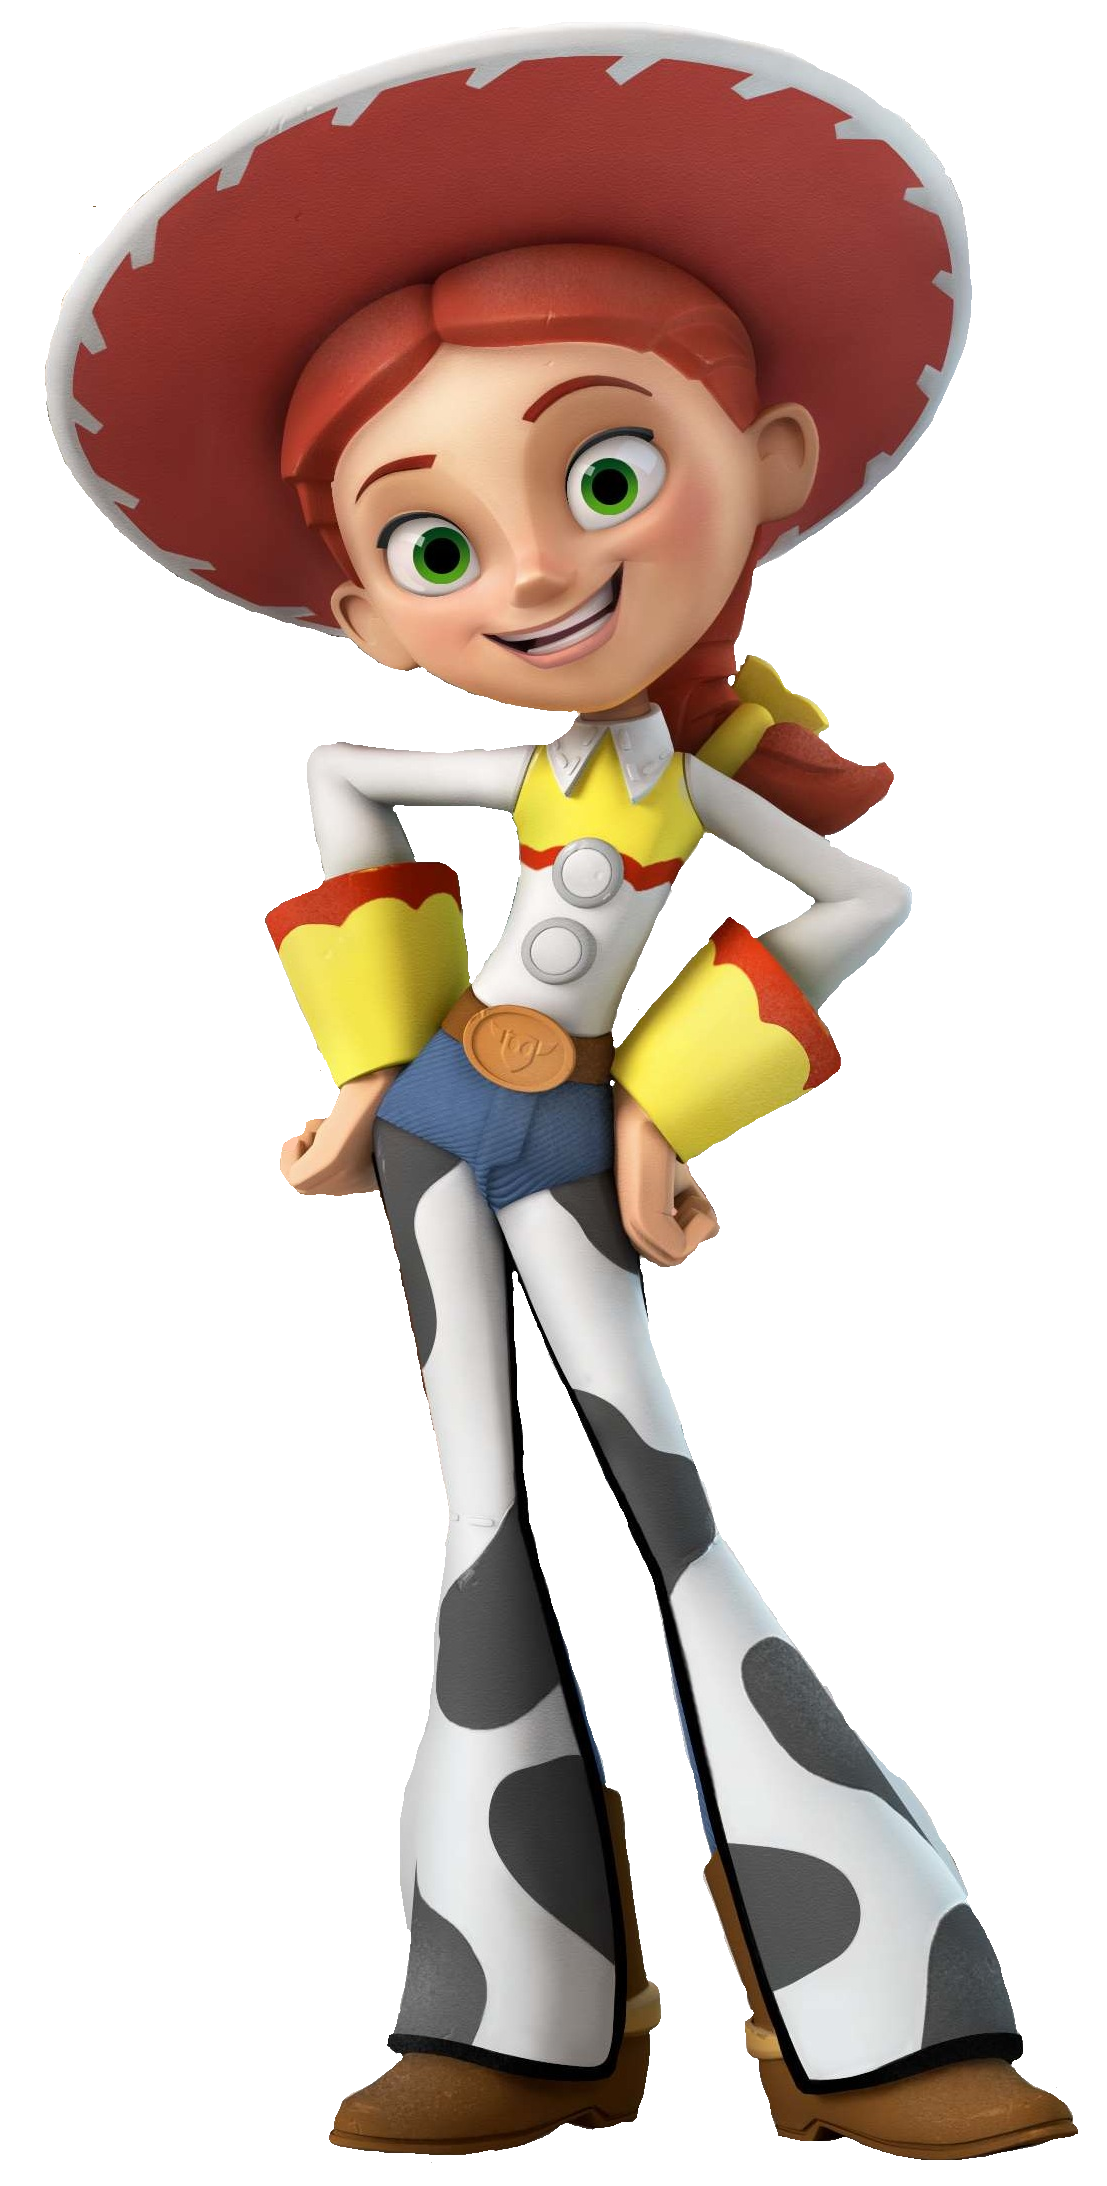 Download Toy Story Jessie File HQ PNG Image FreePNGImg.